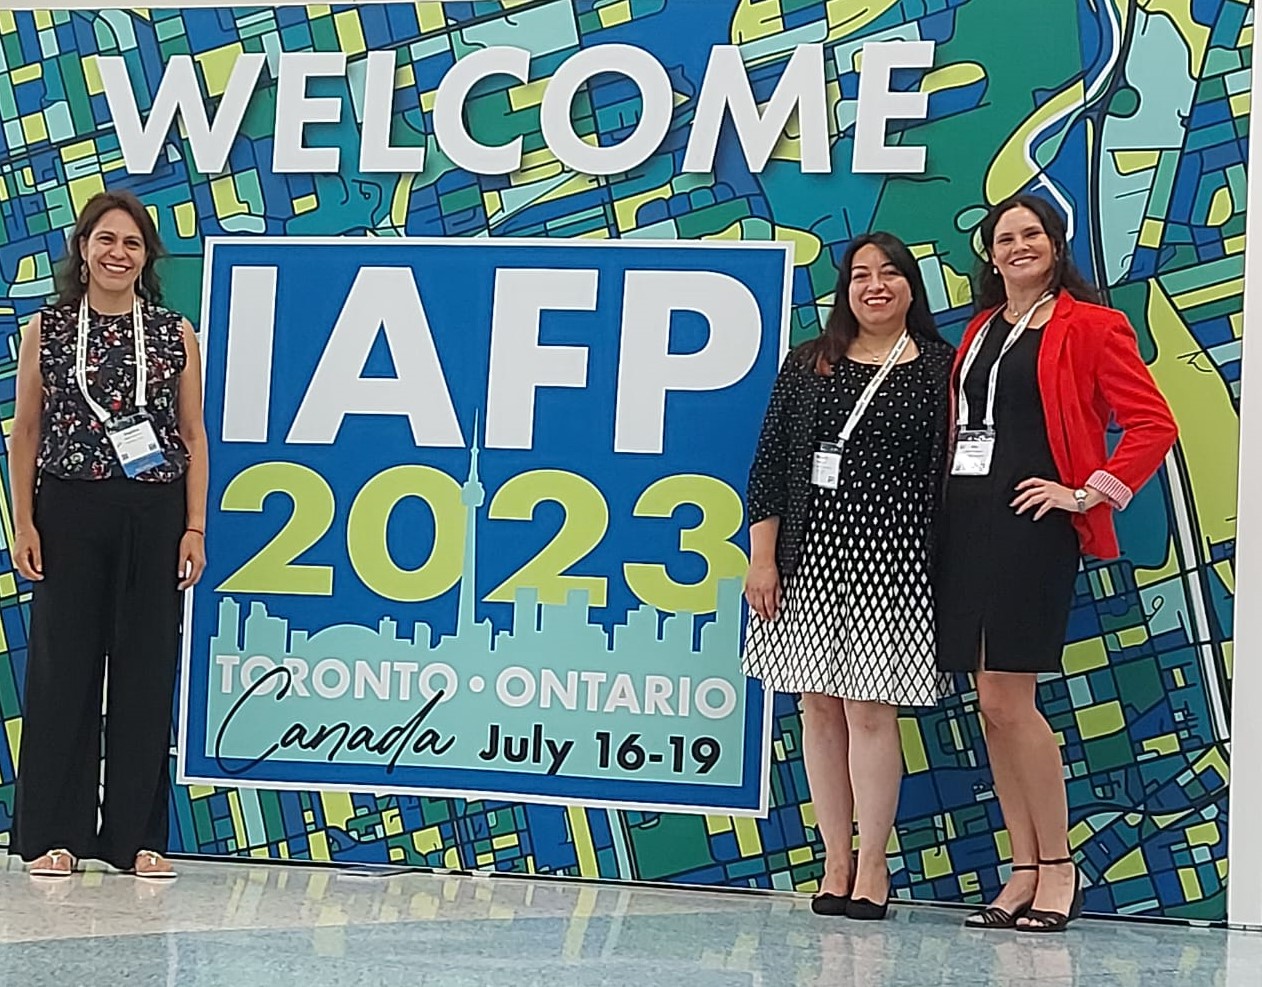 From left to right: Dr. Angelica Reyes-Jara (UCh, Chile), Dr. Magaly Toro (JIFSAN/UMD, US), and Dr. Aiko Adell (UNAB, Chile), IAFP2023, Toronto, Canada.